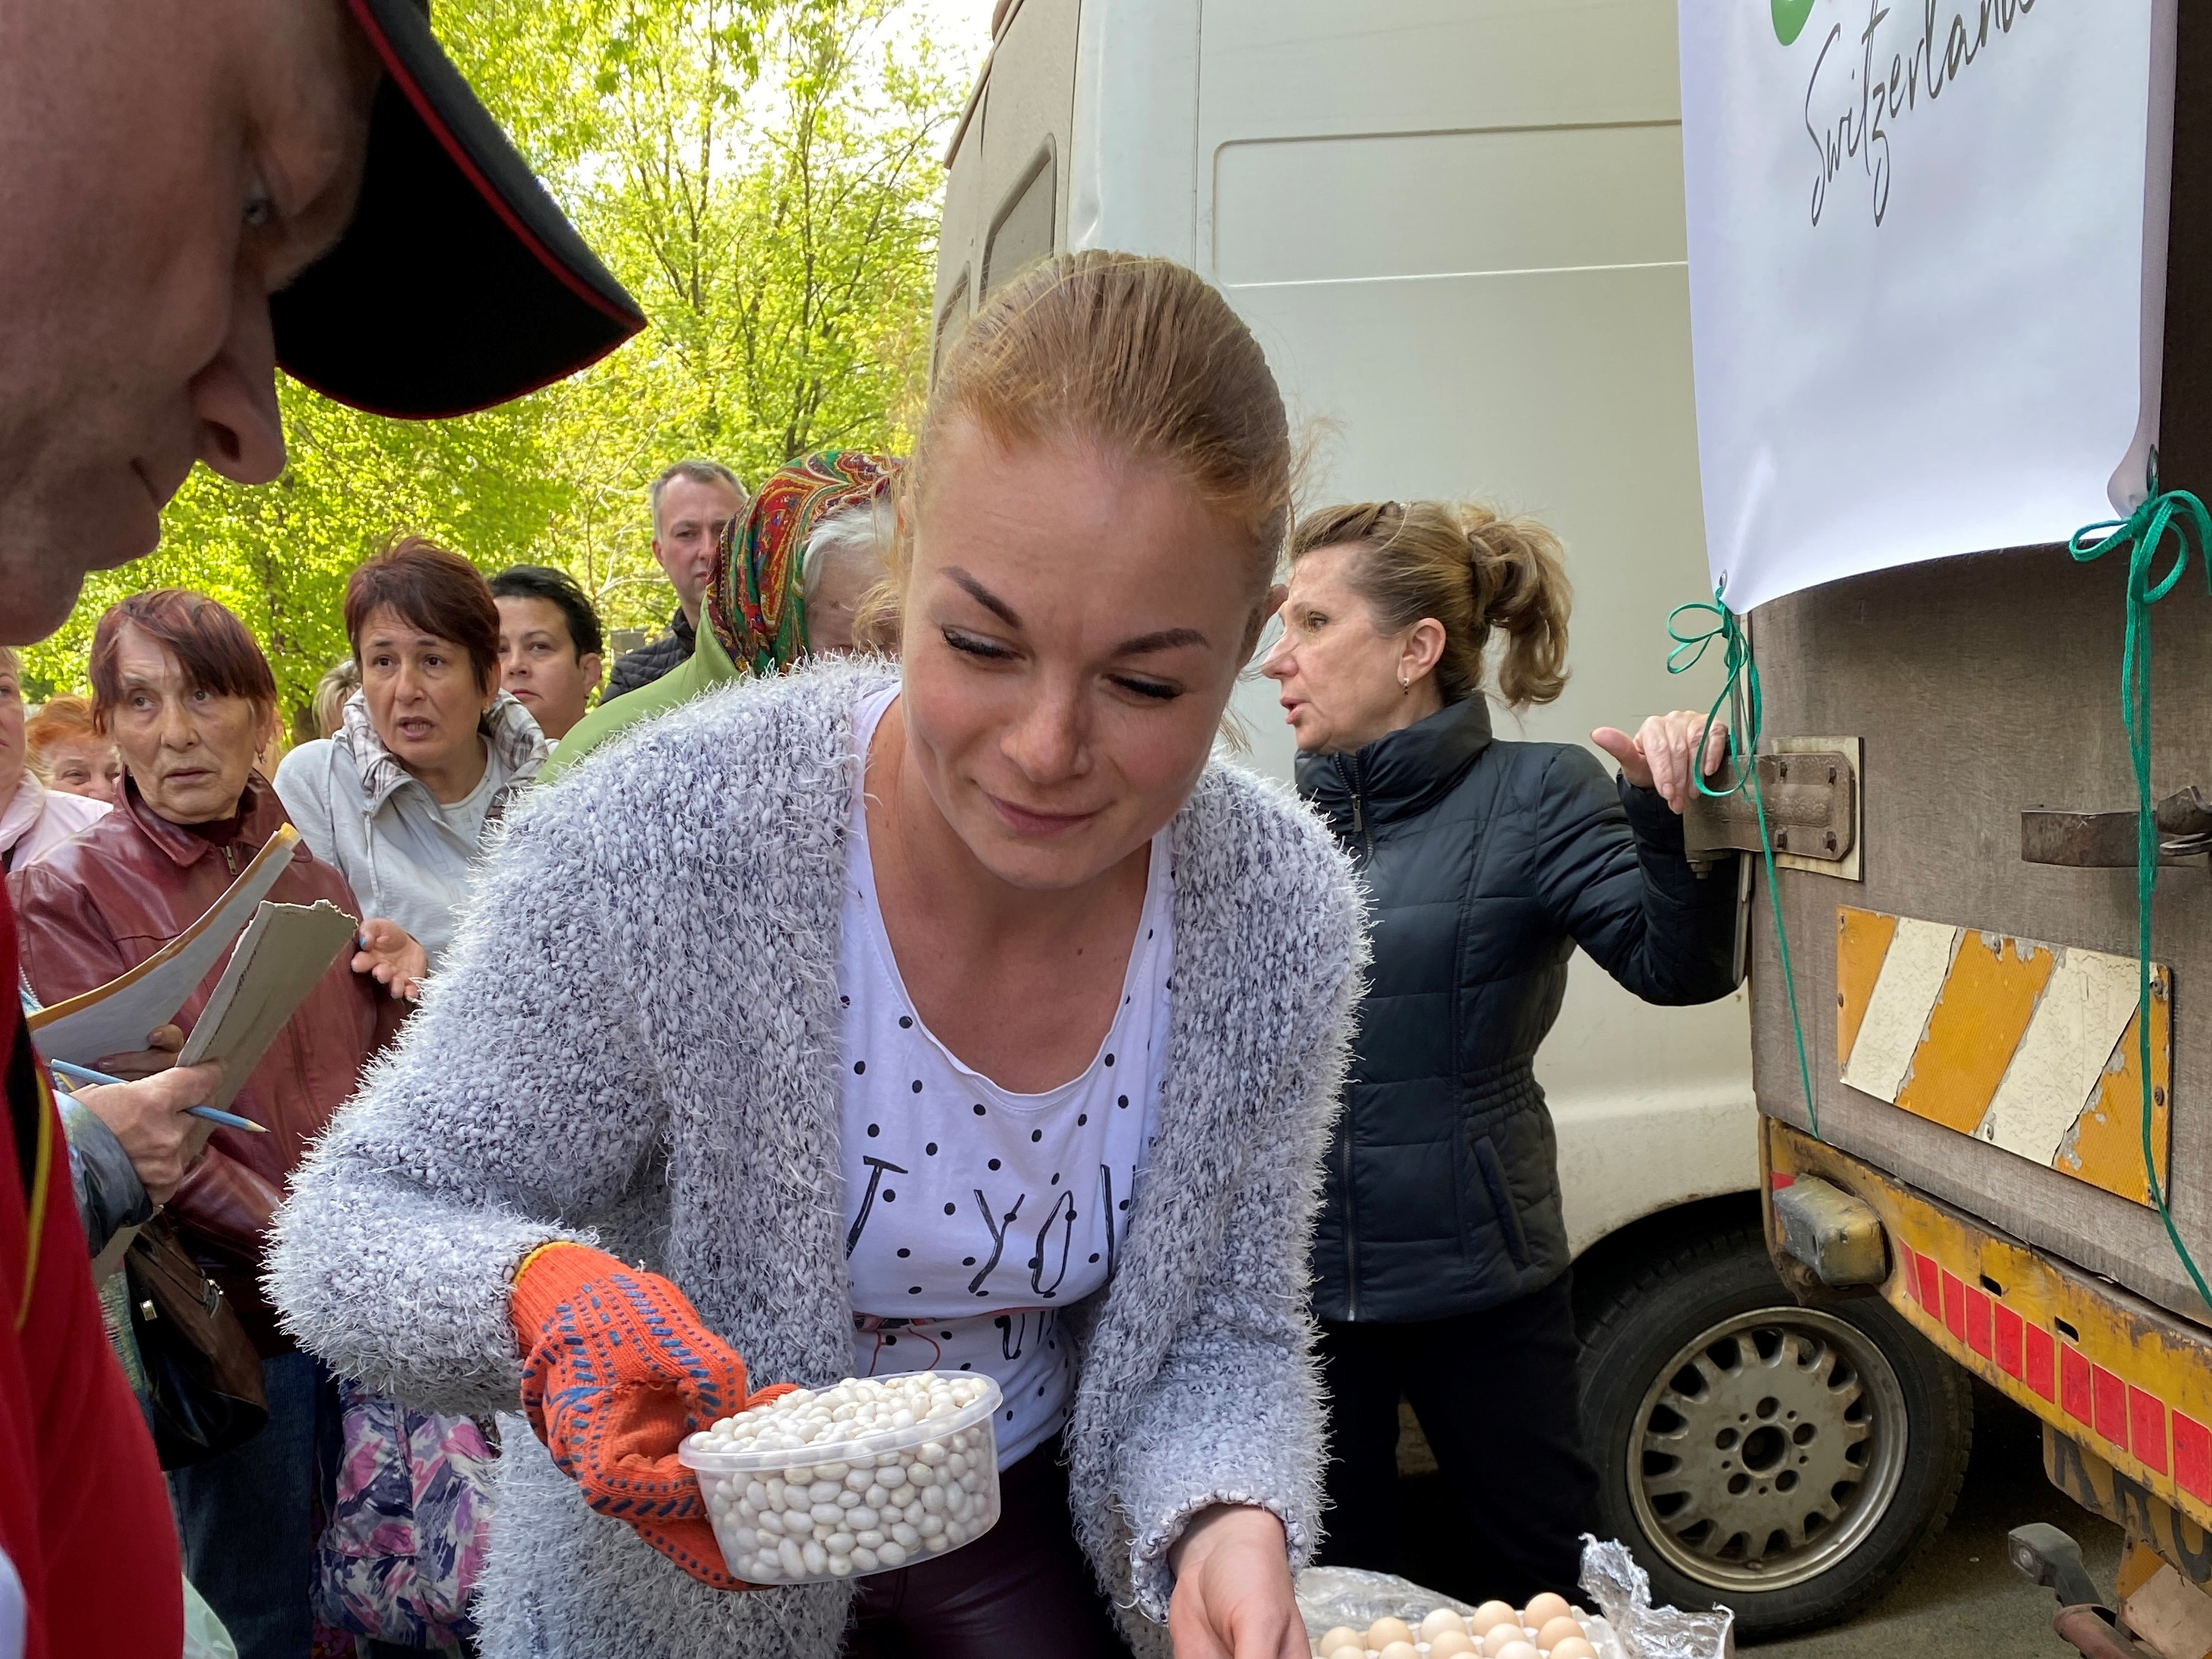 A woman distributes beans and eggs to victims. In the background, several people stand agitated in front of the Green Cross Switzerland food truck.